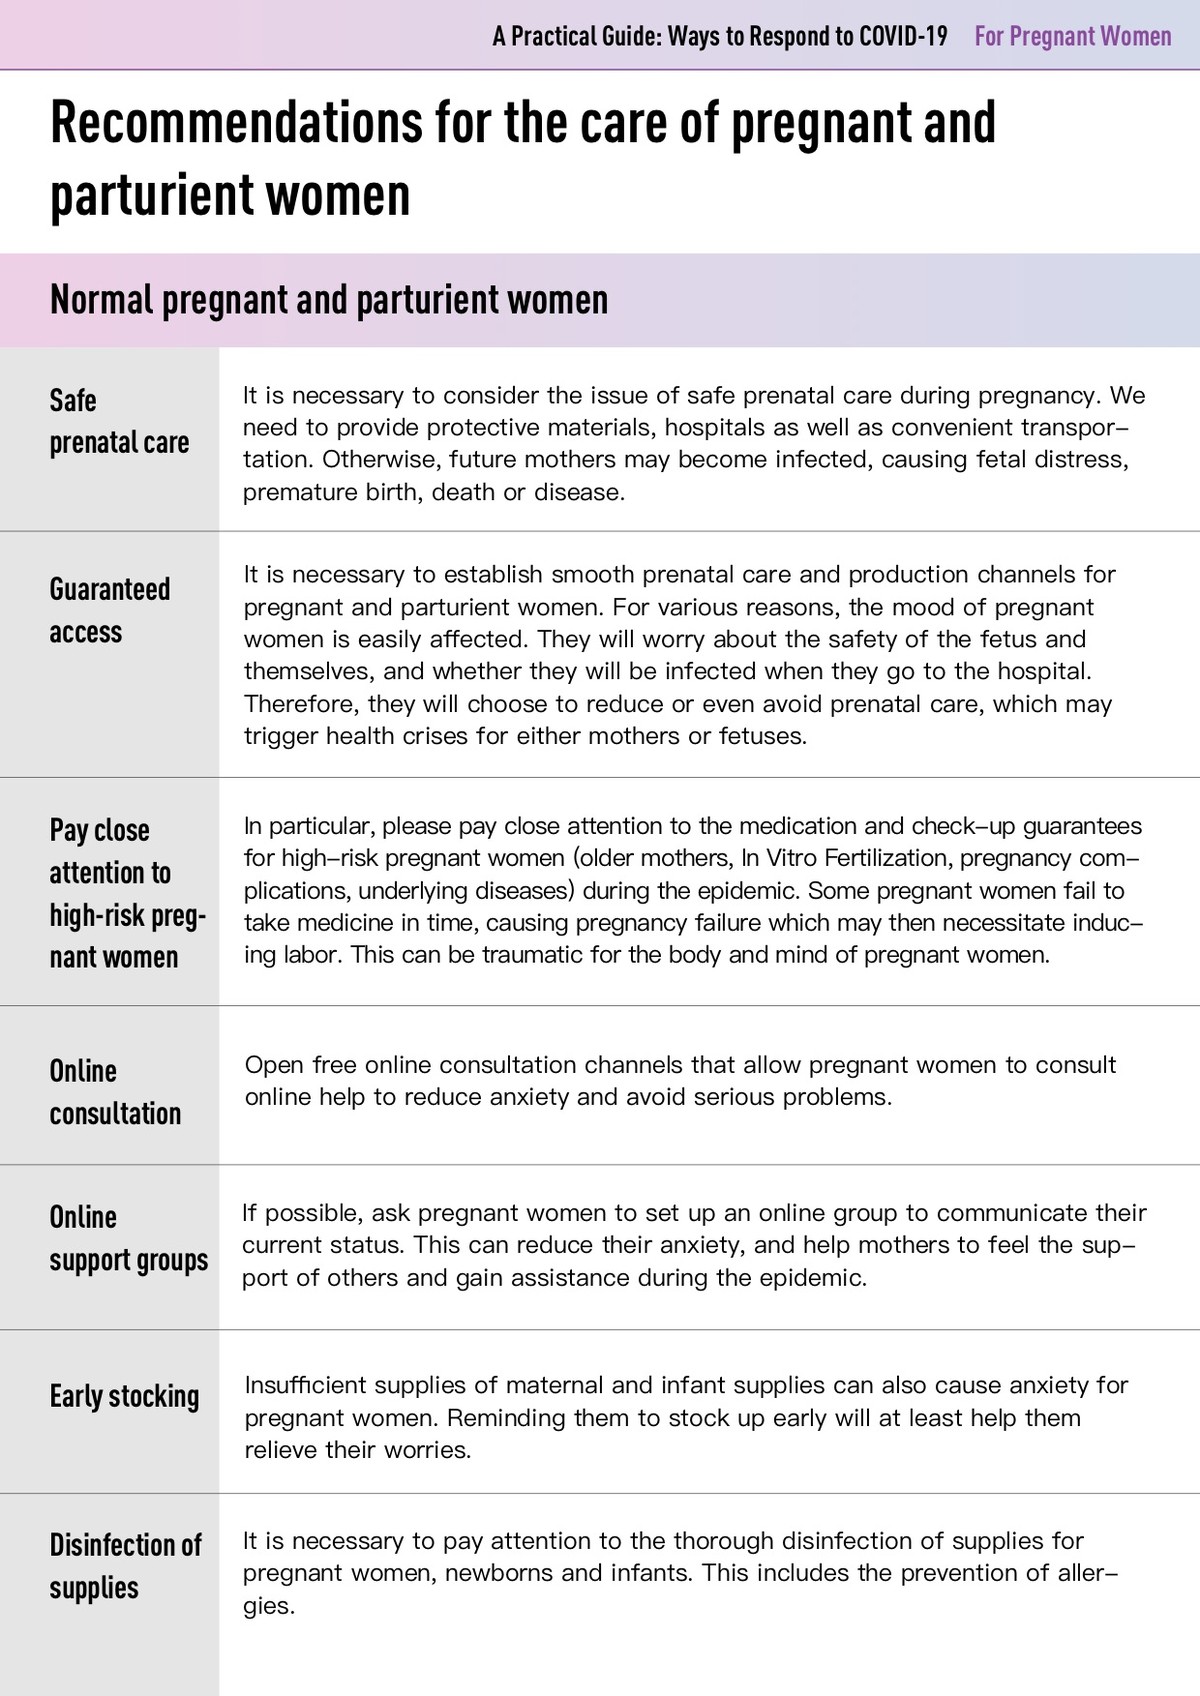 A Practical Guide: Ways to Respond to COVID-19 For Pregnant Women